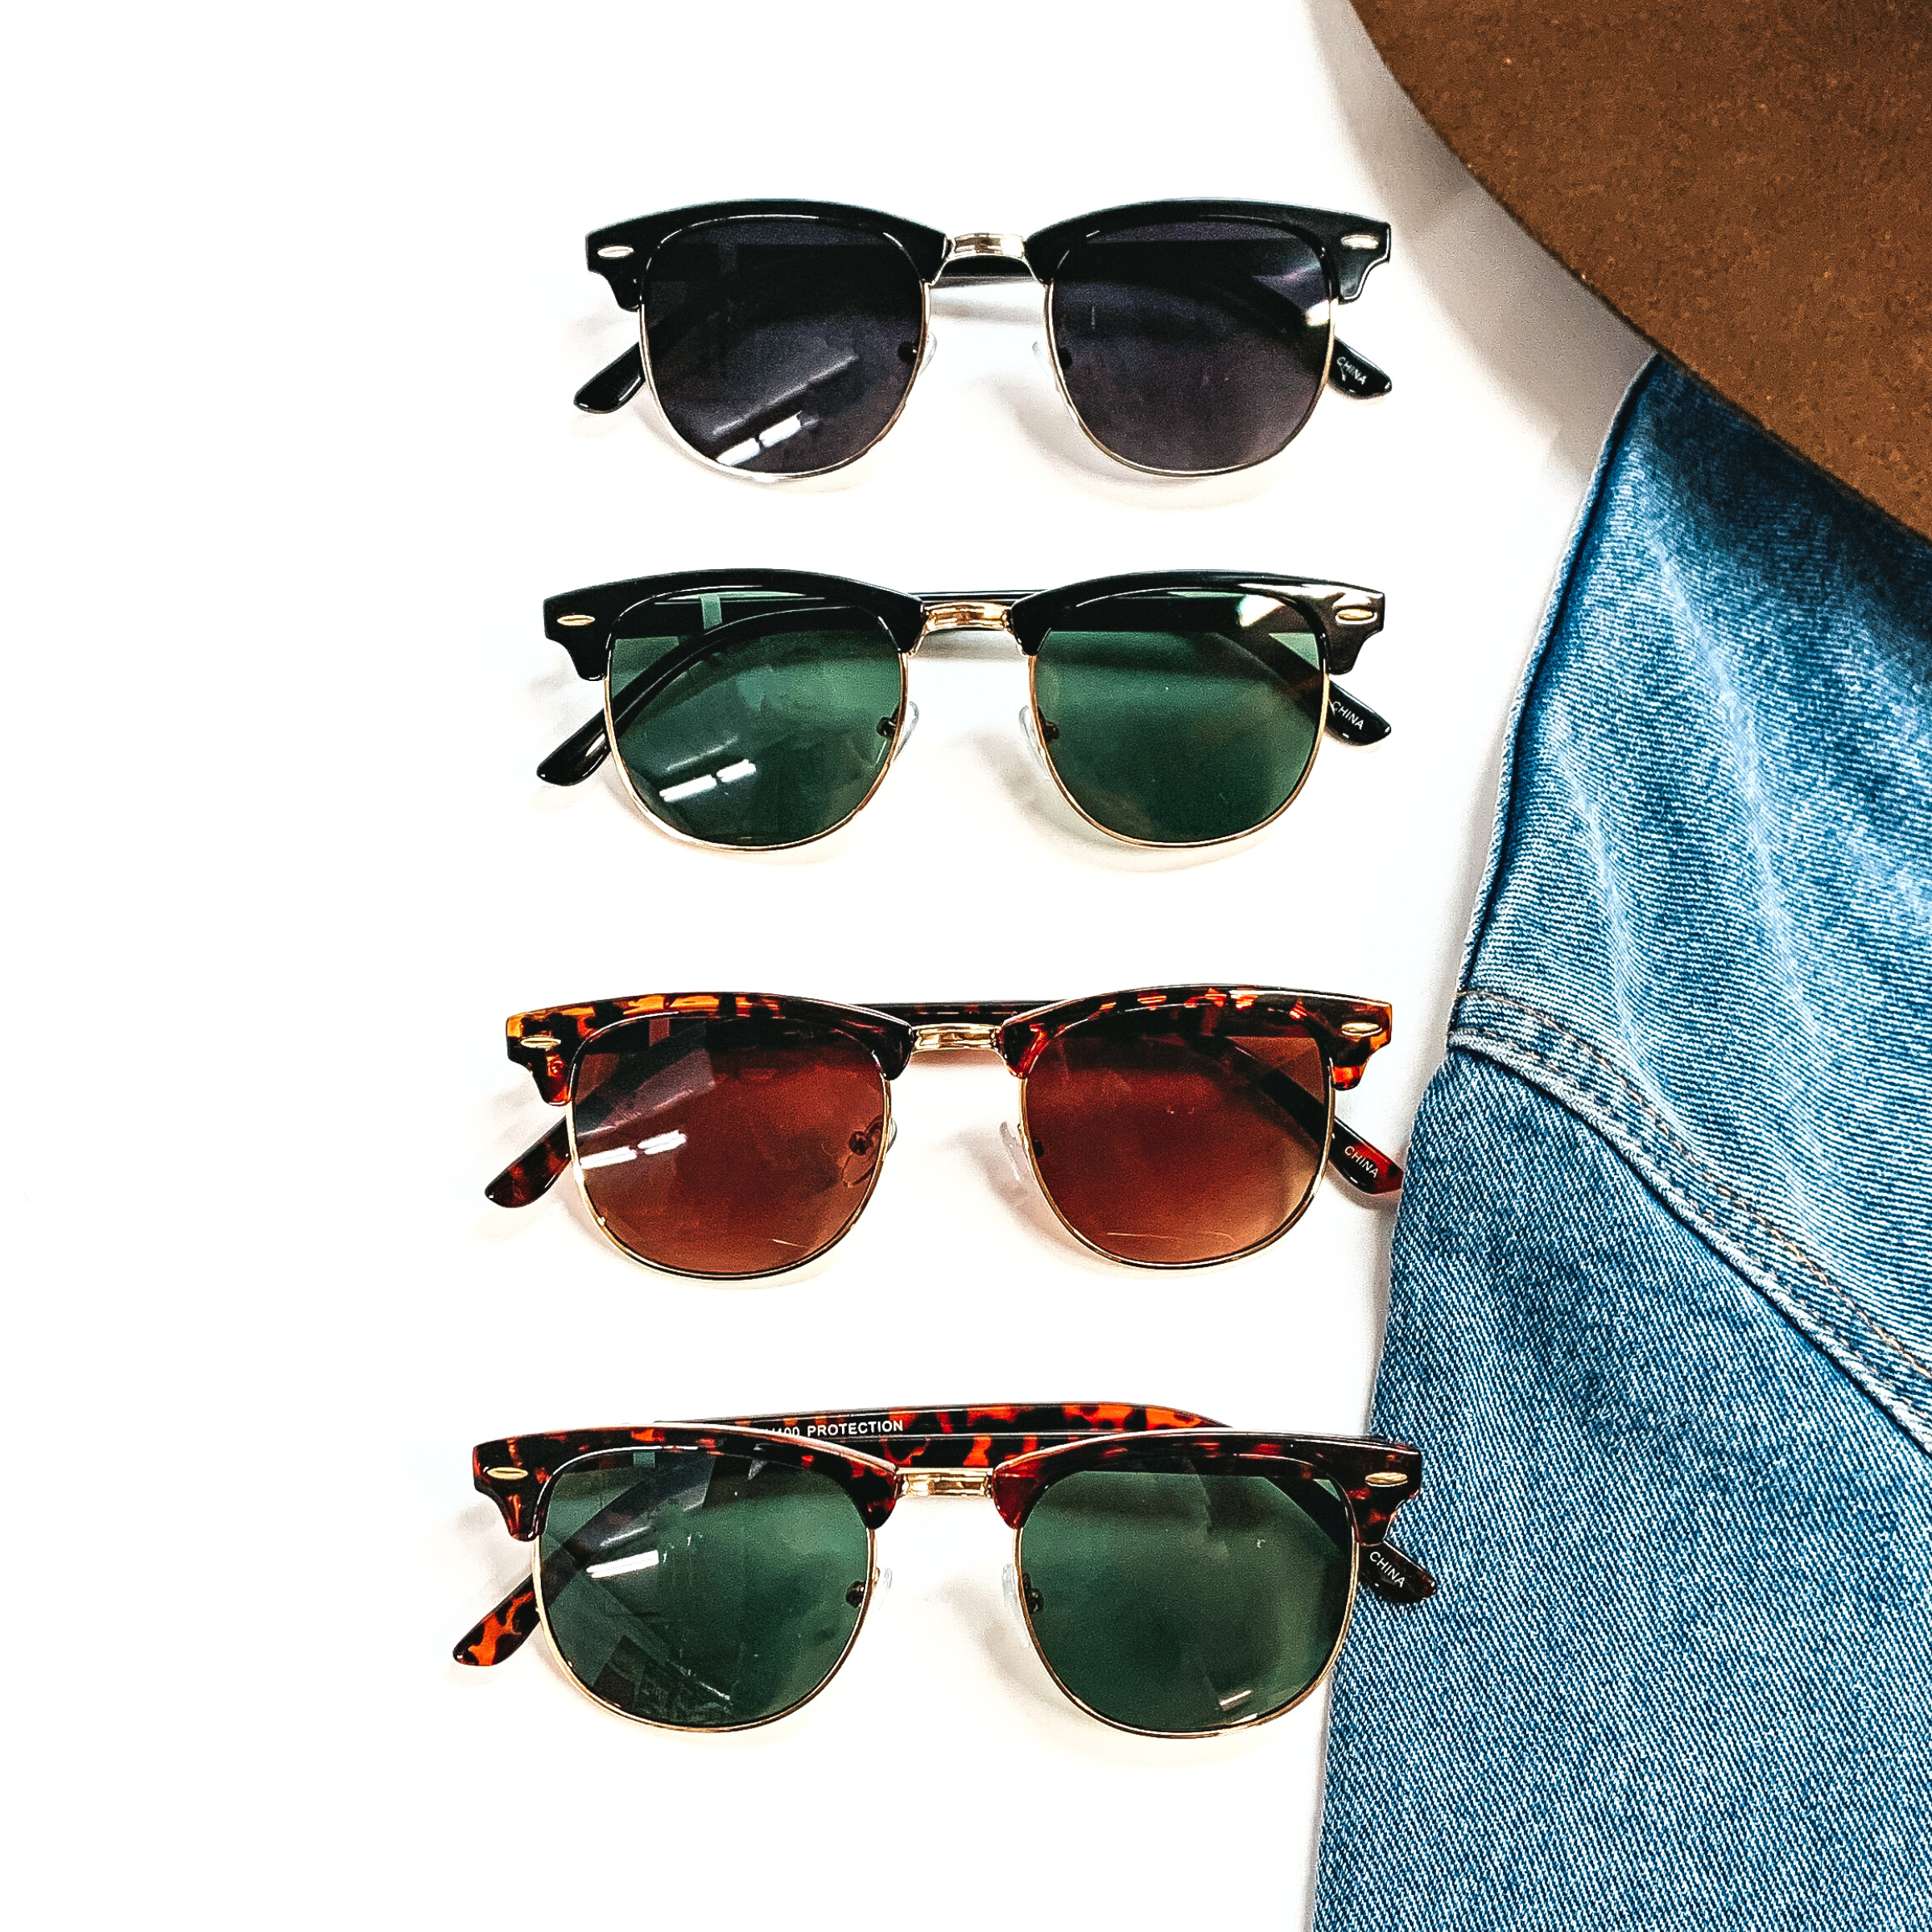 There are four pairs of sunglasses in different frame colors/print and color lenses. These sunglasses are taken on a white background and a jean jacket sleeve with a  dark brown felt hat on the top as decor.